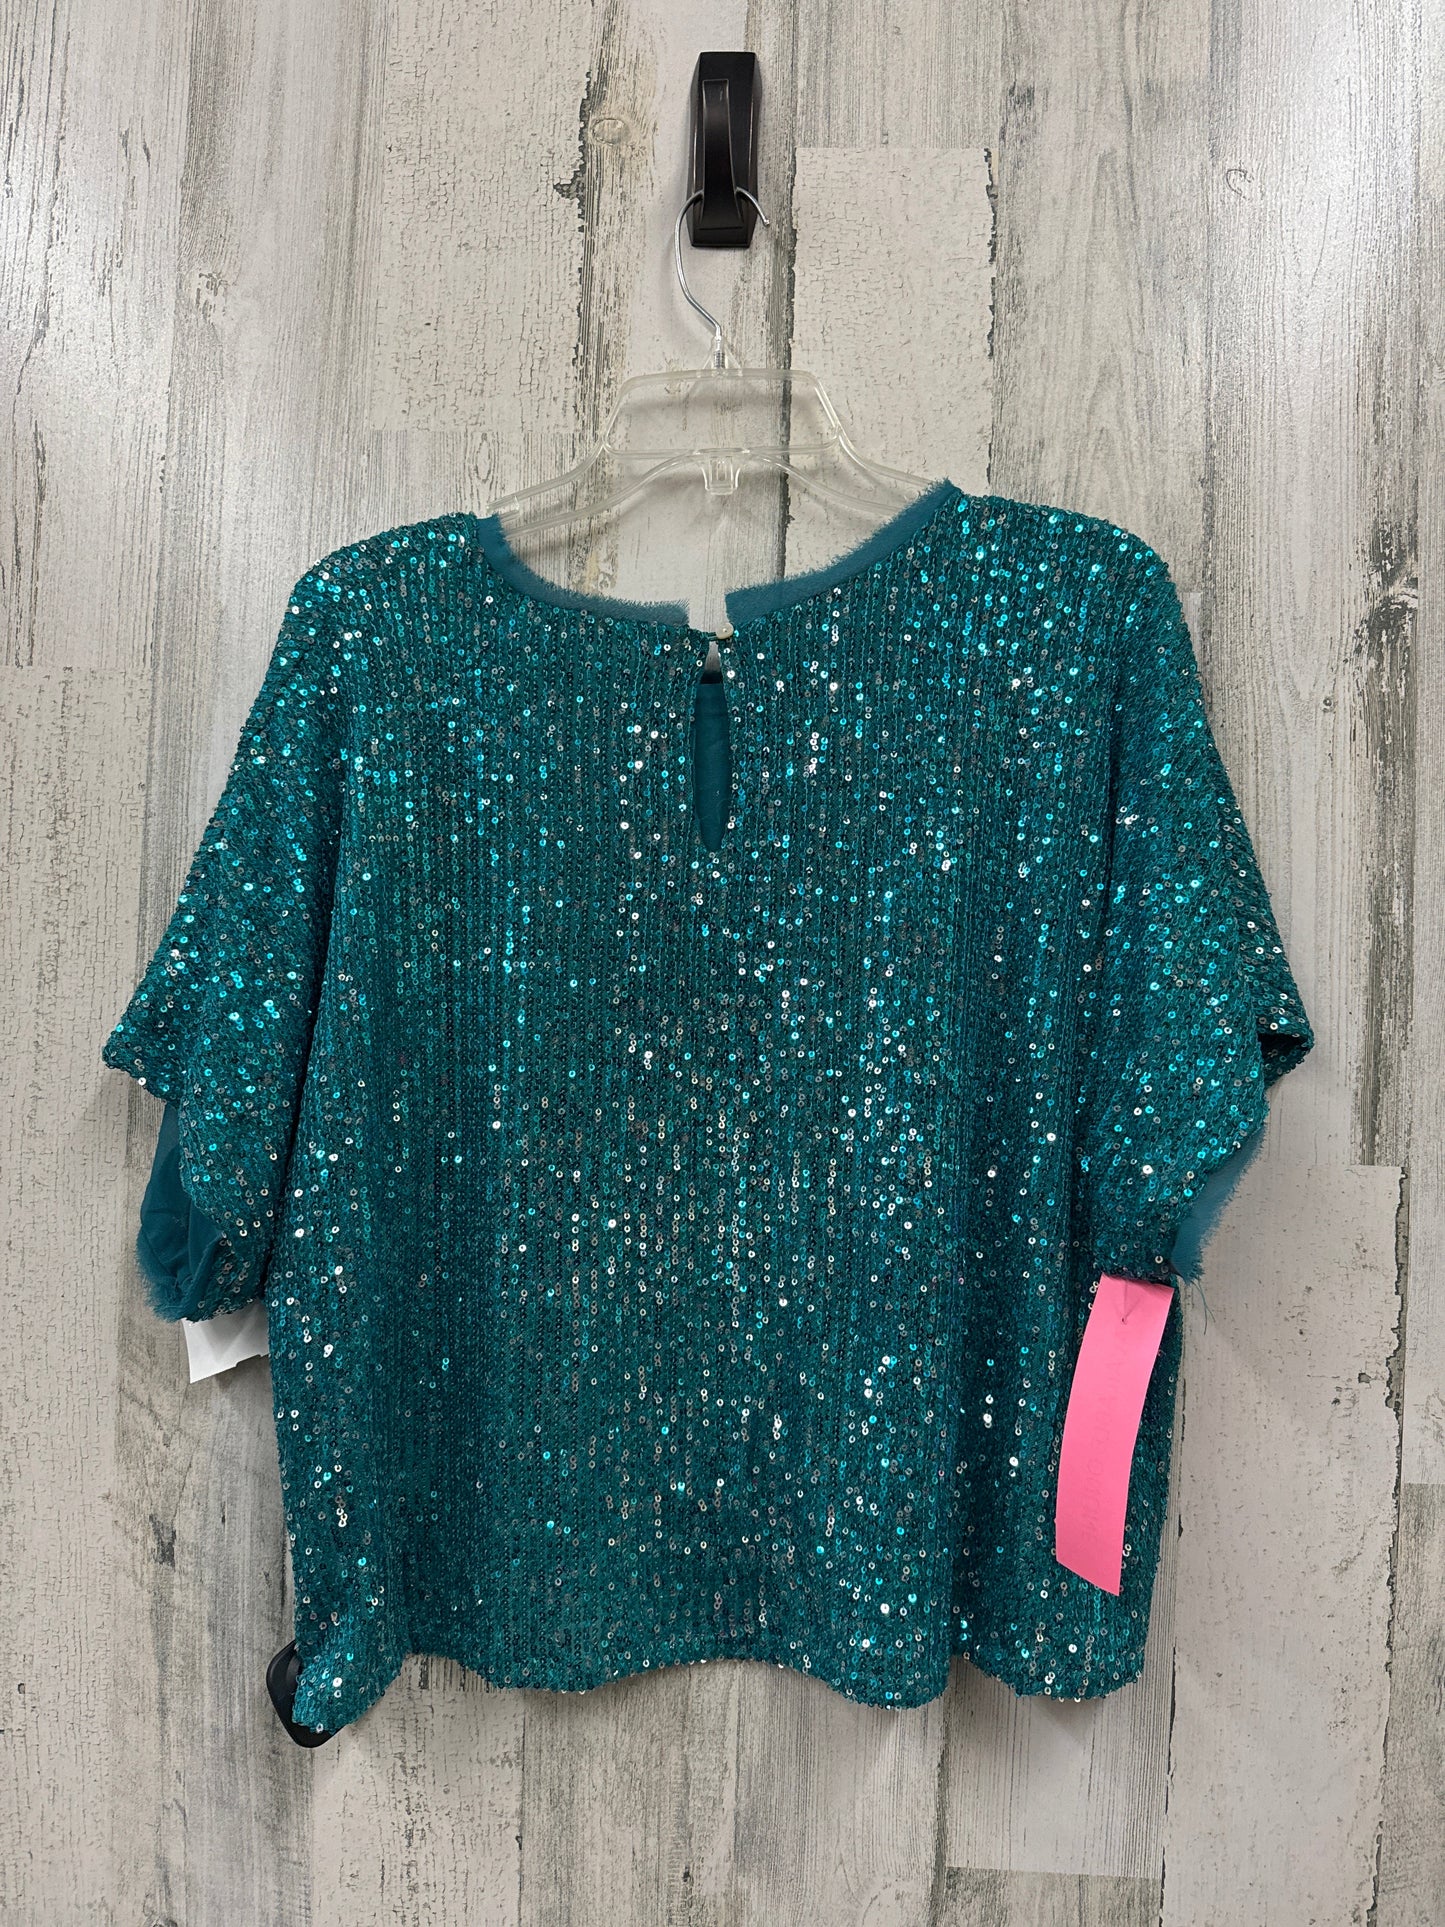 Teal Top Short Sleeve Glam, Size L